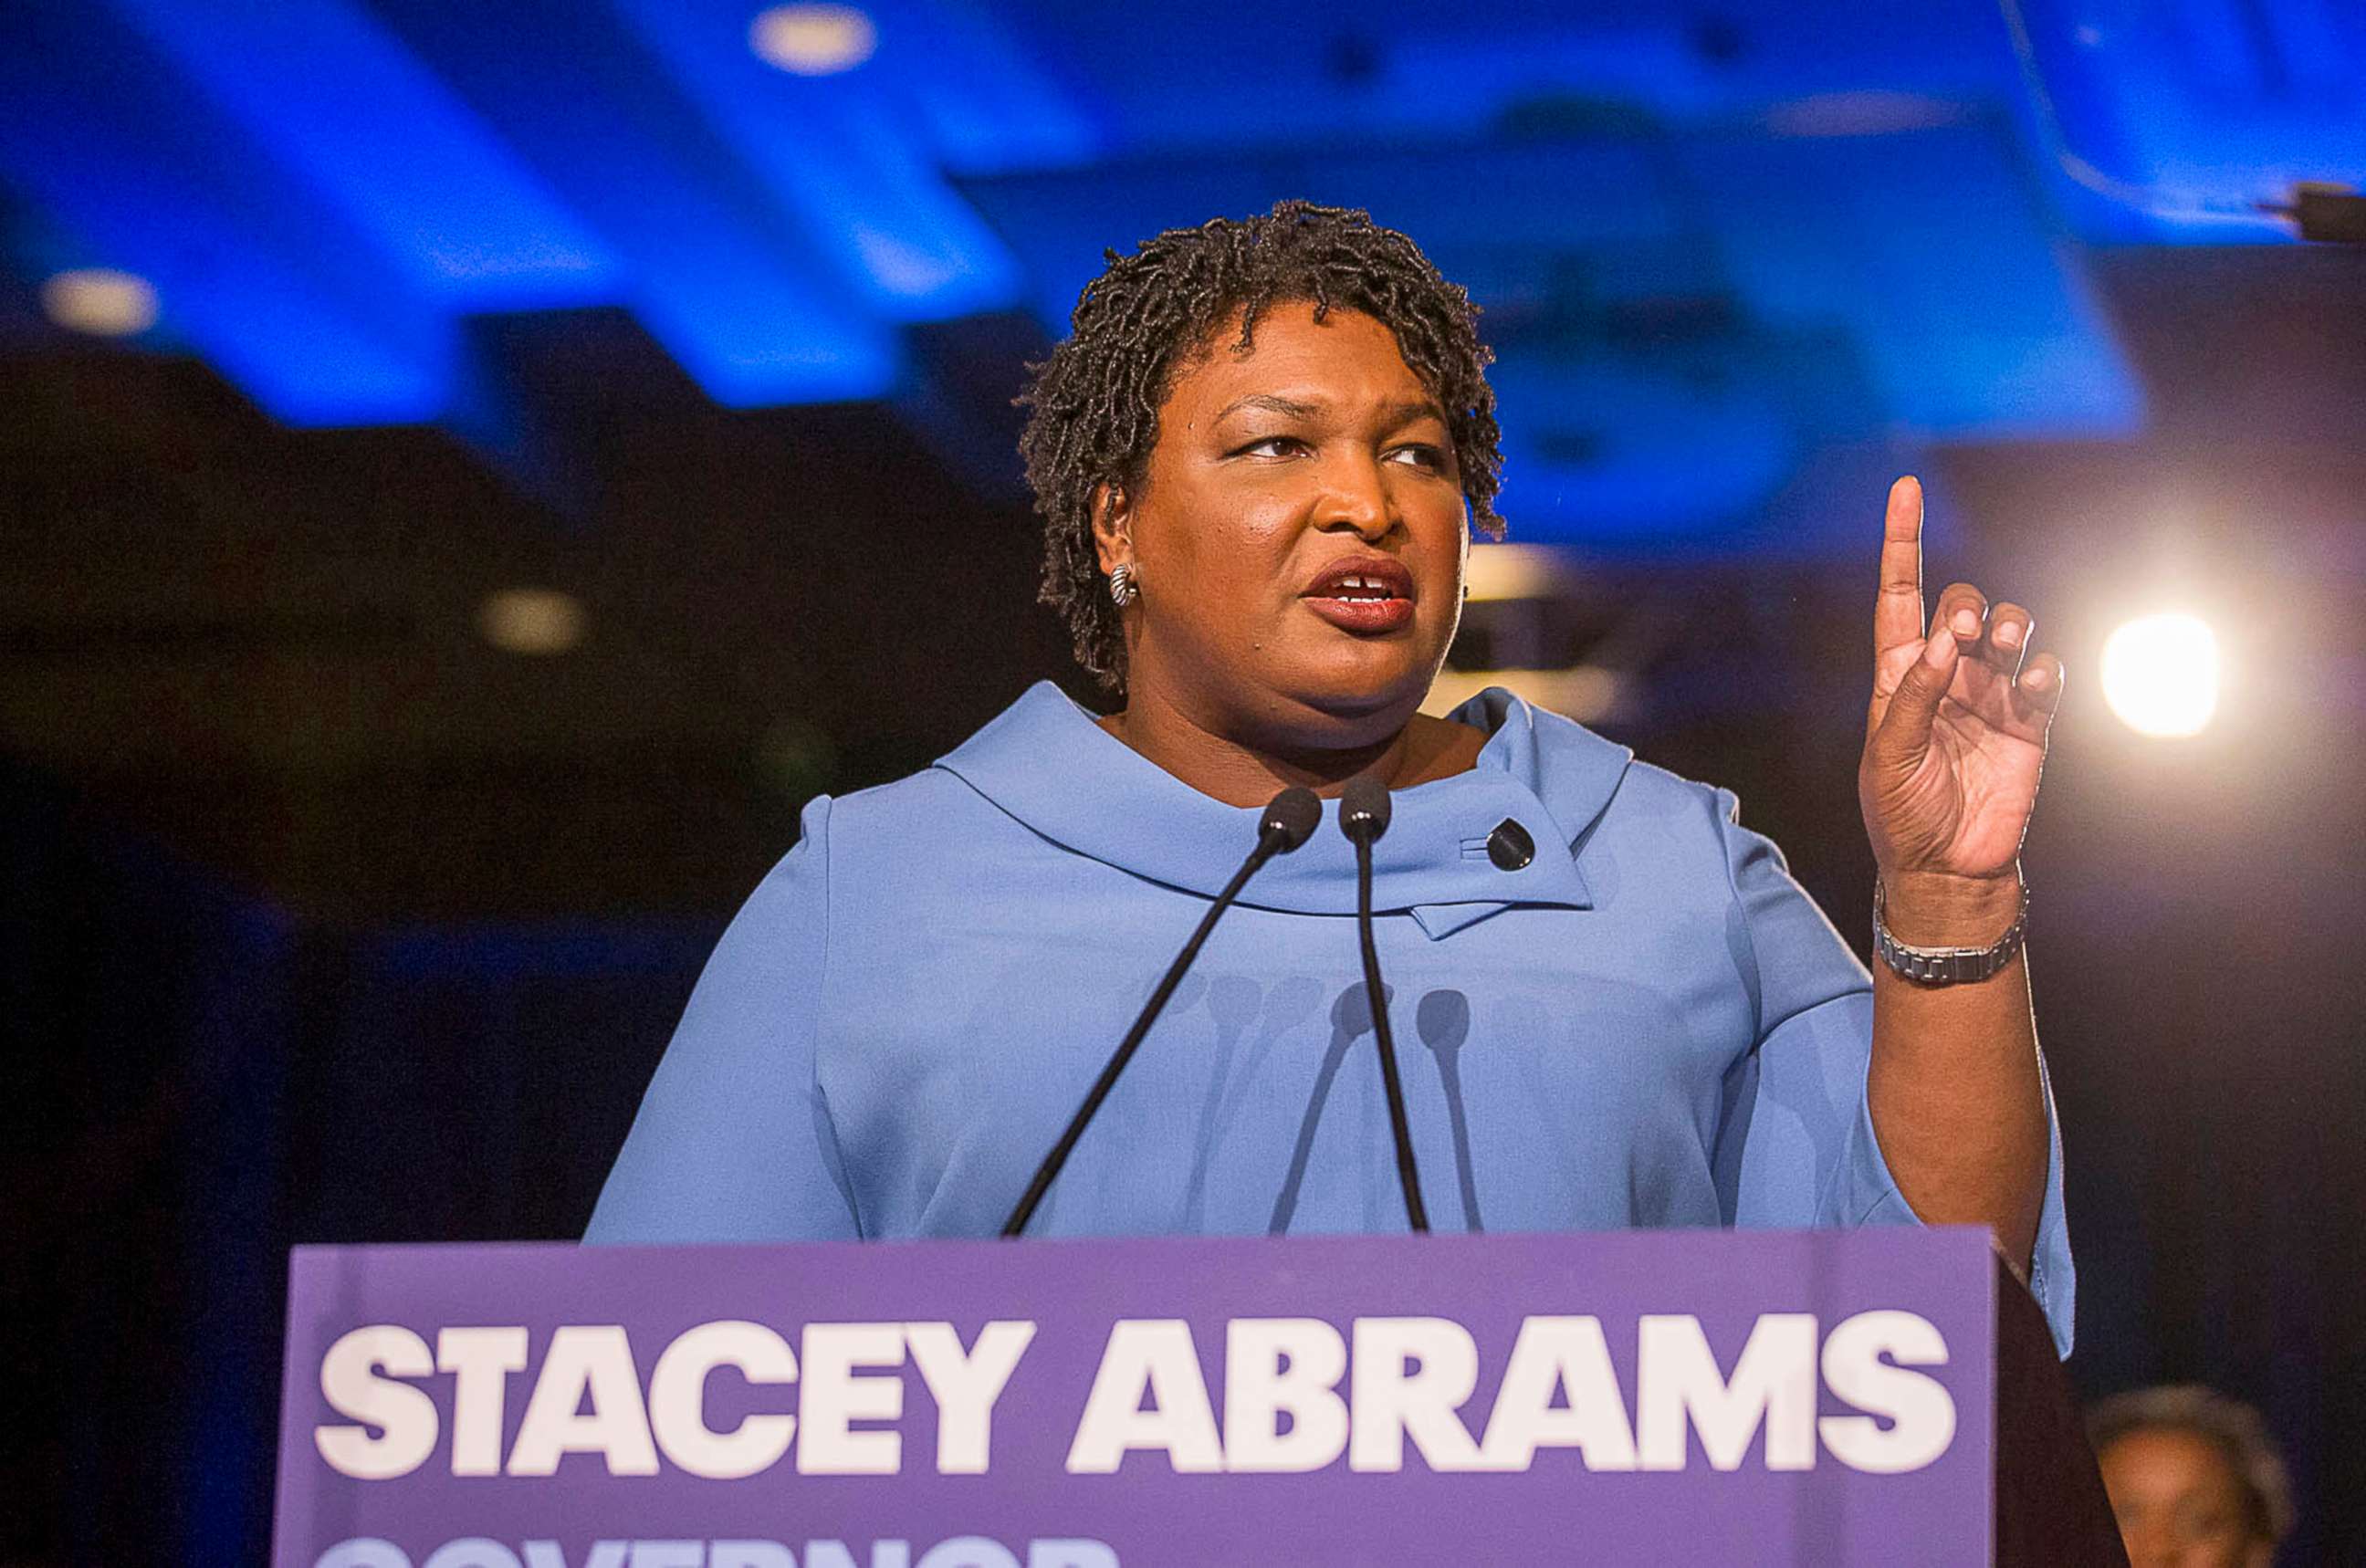 PHOTO: In this Nov. 7, 2018, file photo, Georgia gubernatorial candidate Stacey Abrams speaks to her supporters during her election night watch party in Atlanta.